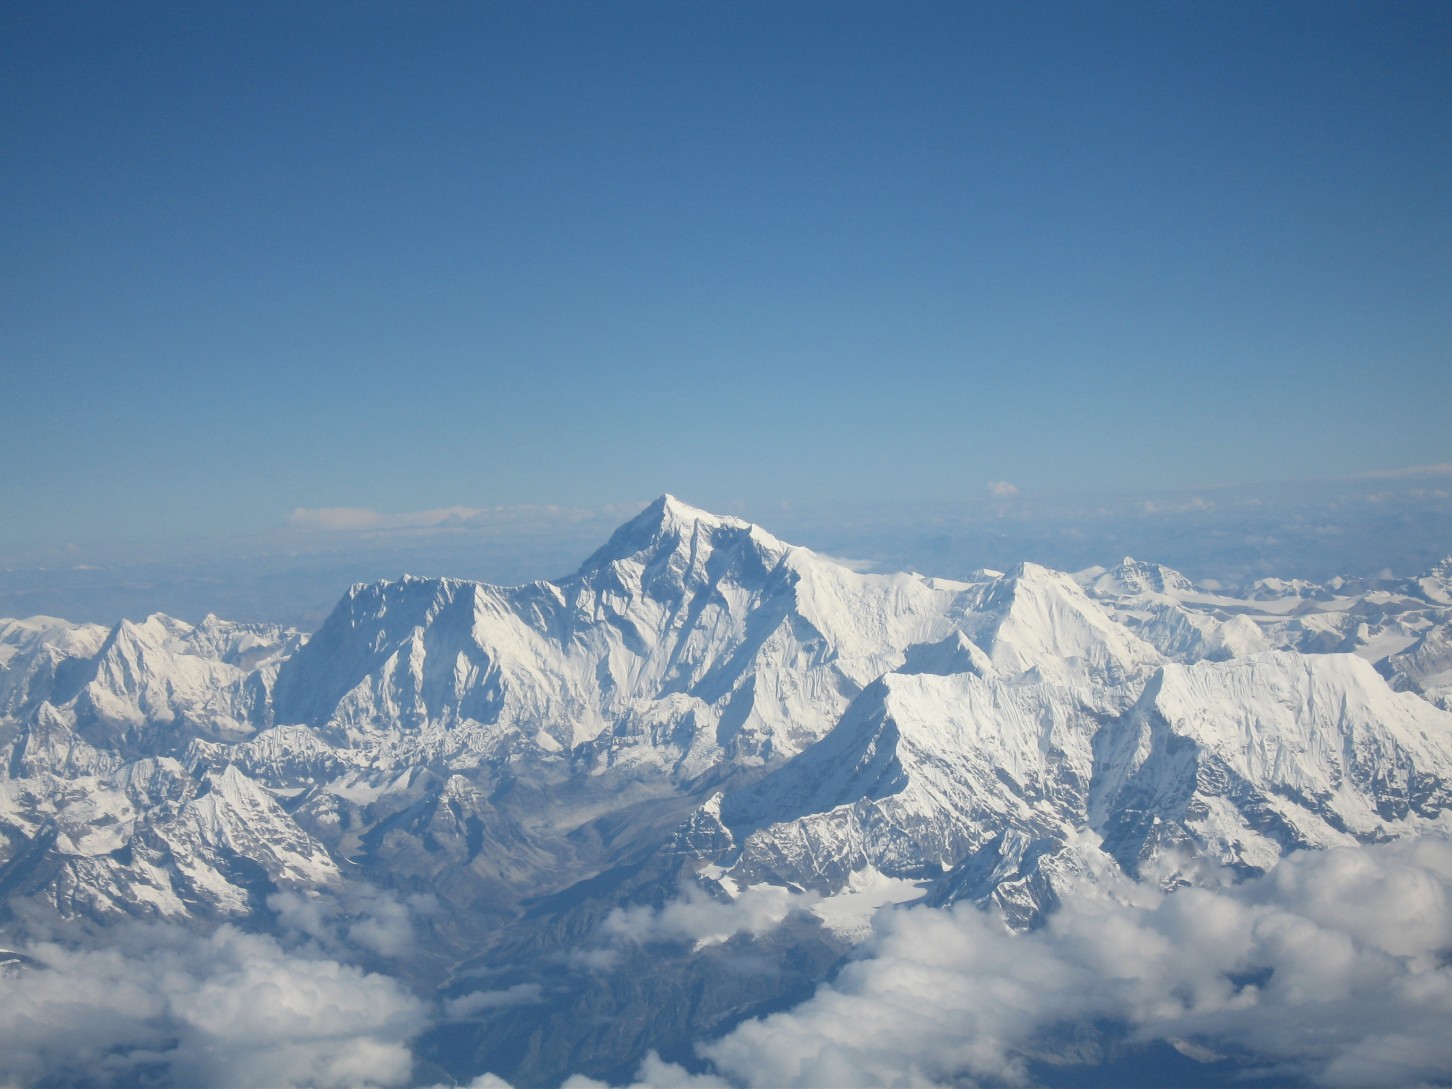 The Sherpas and Everest 